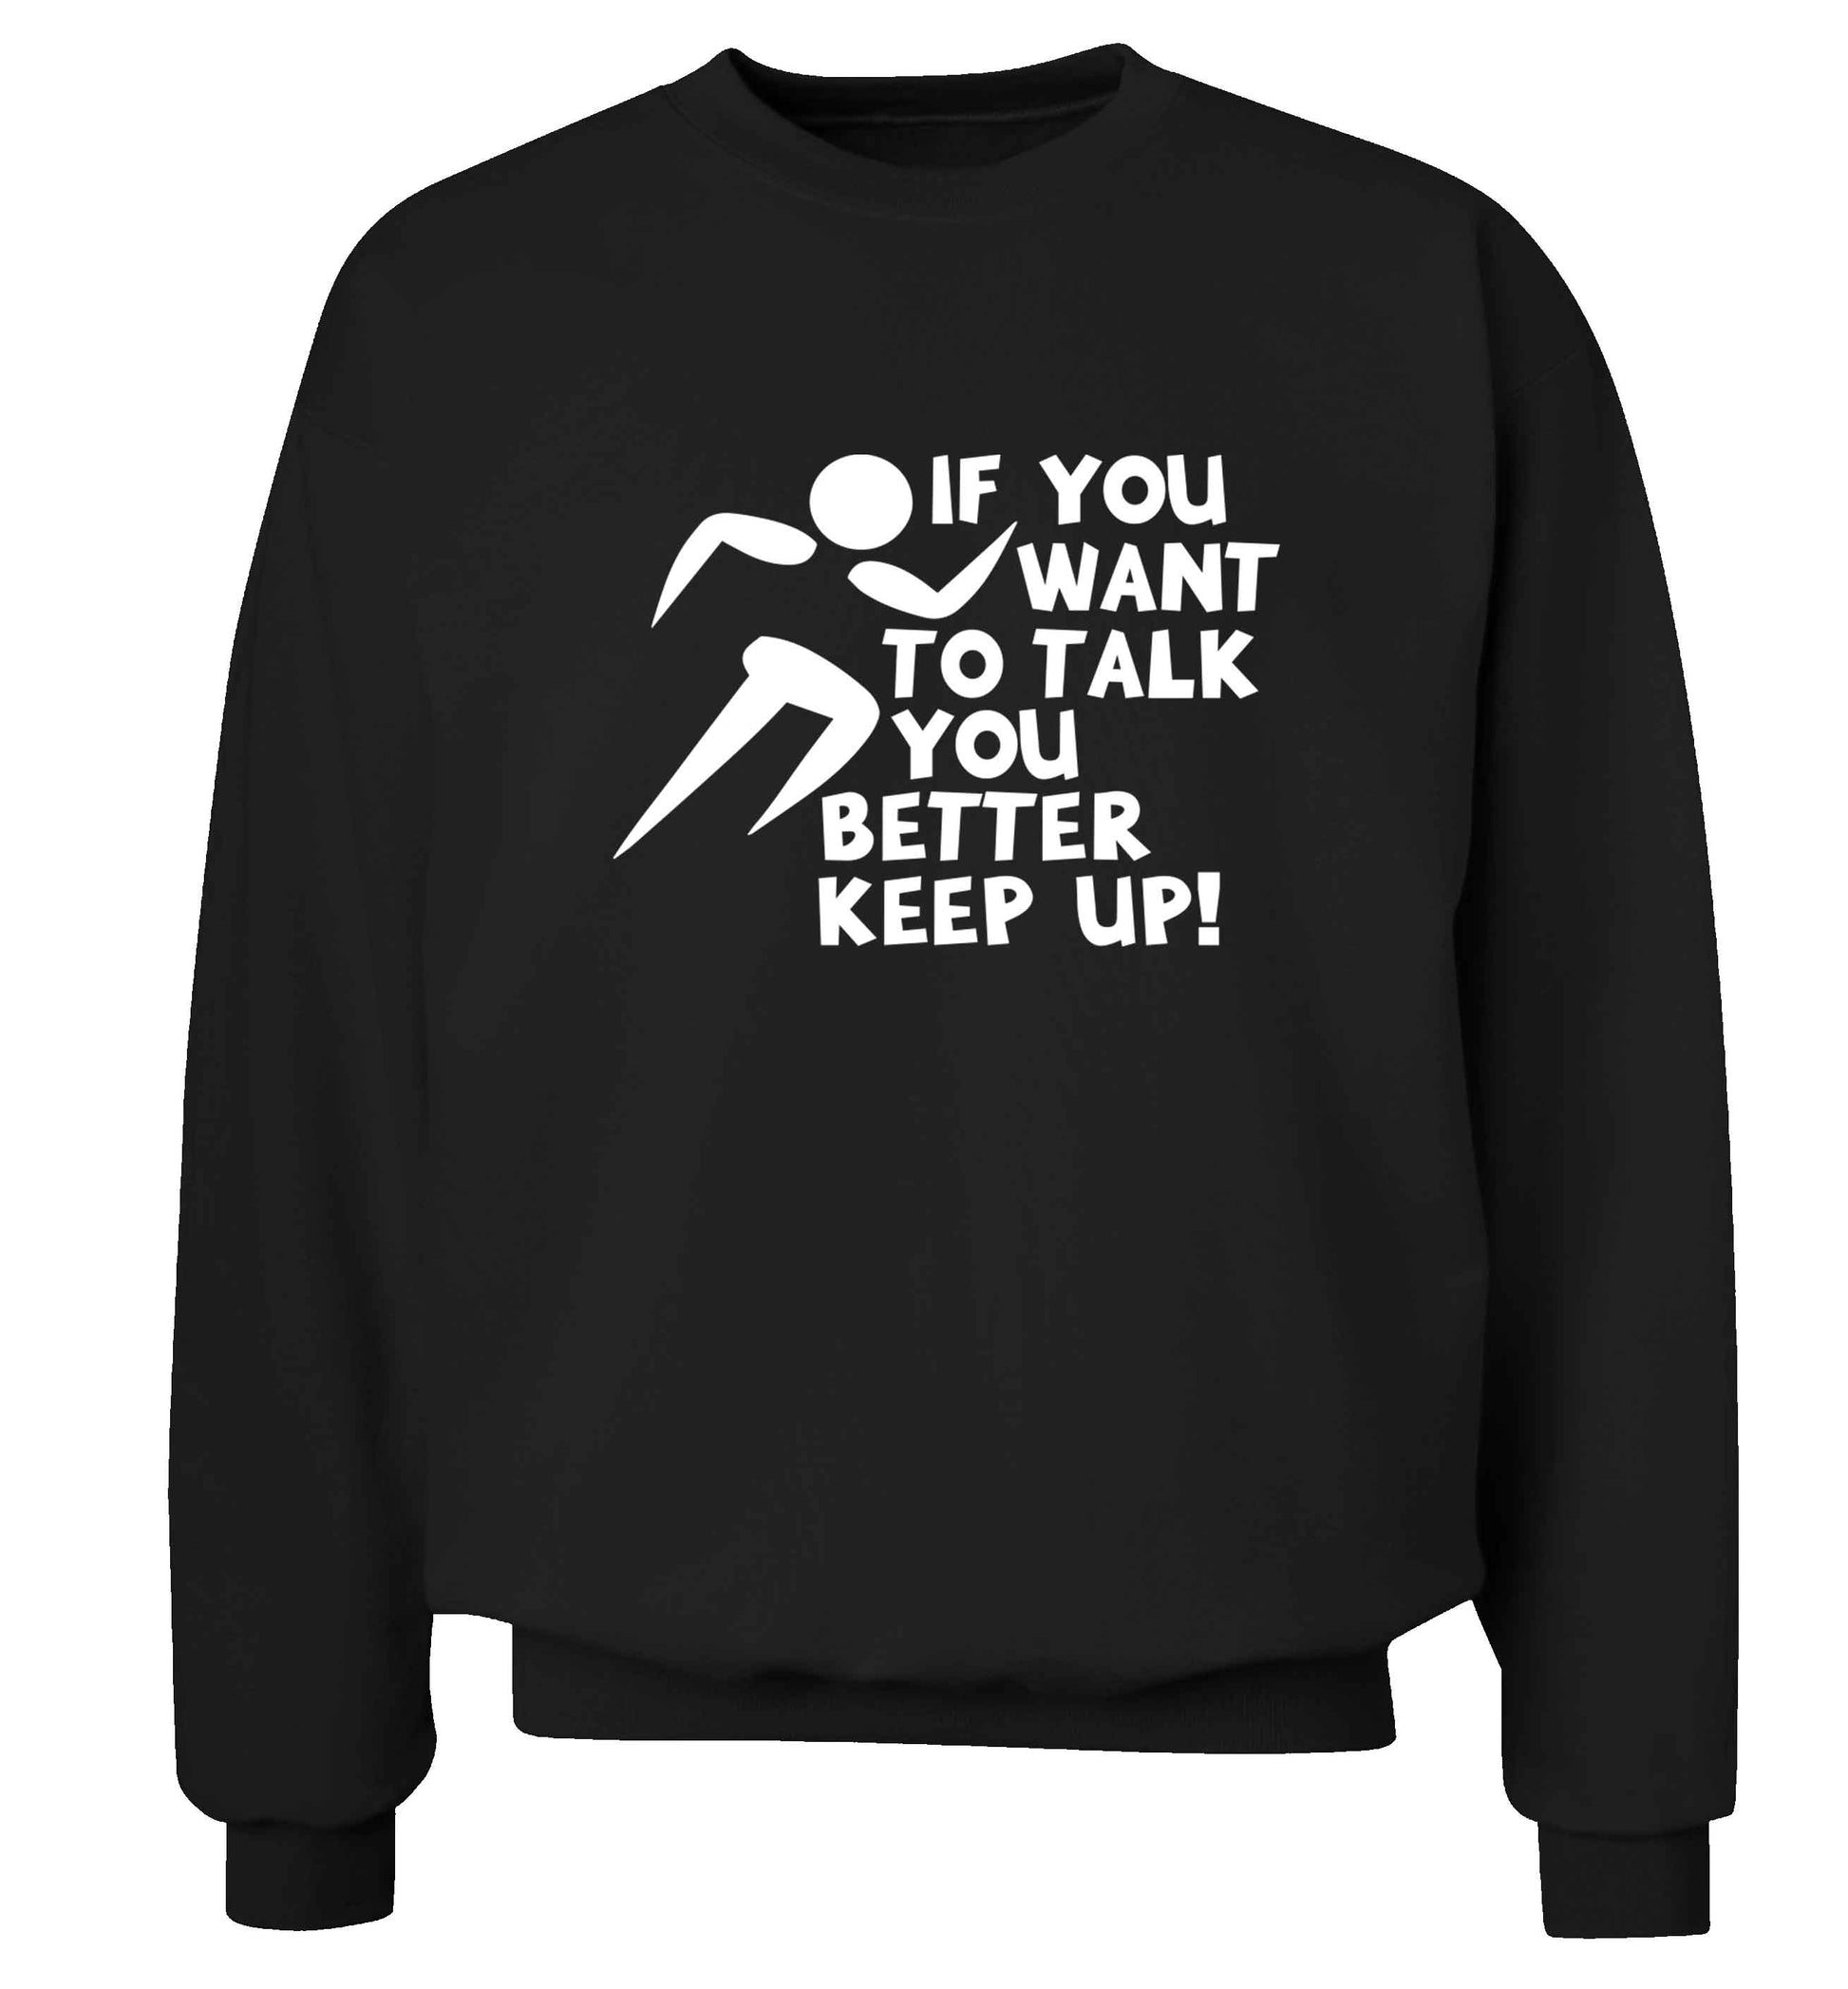 If you want to talk you better keep up! adult's unisex black sweater 2XL